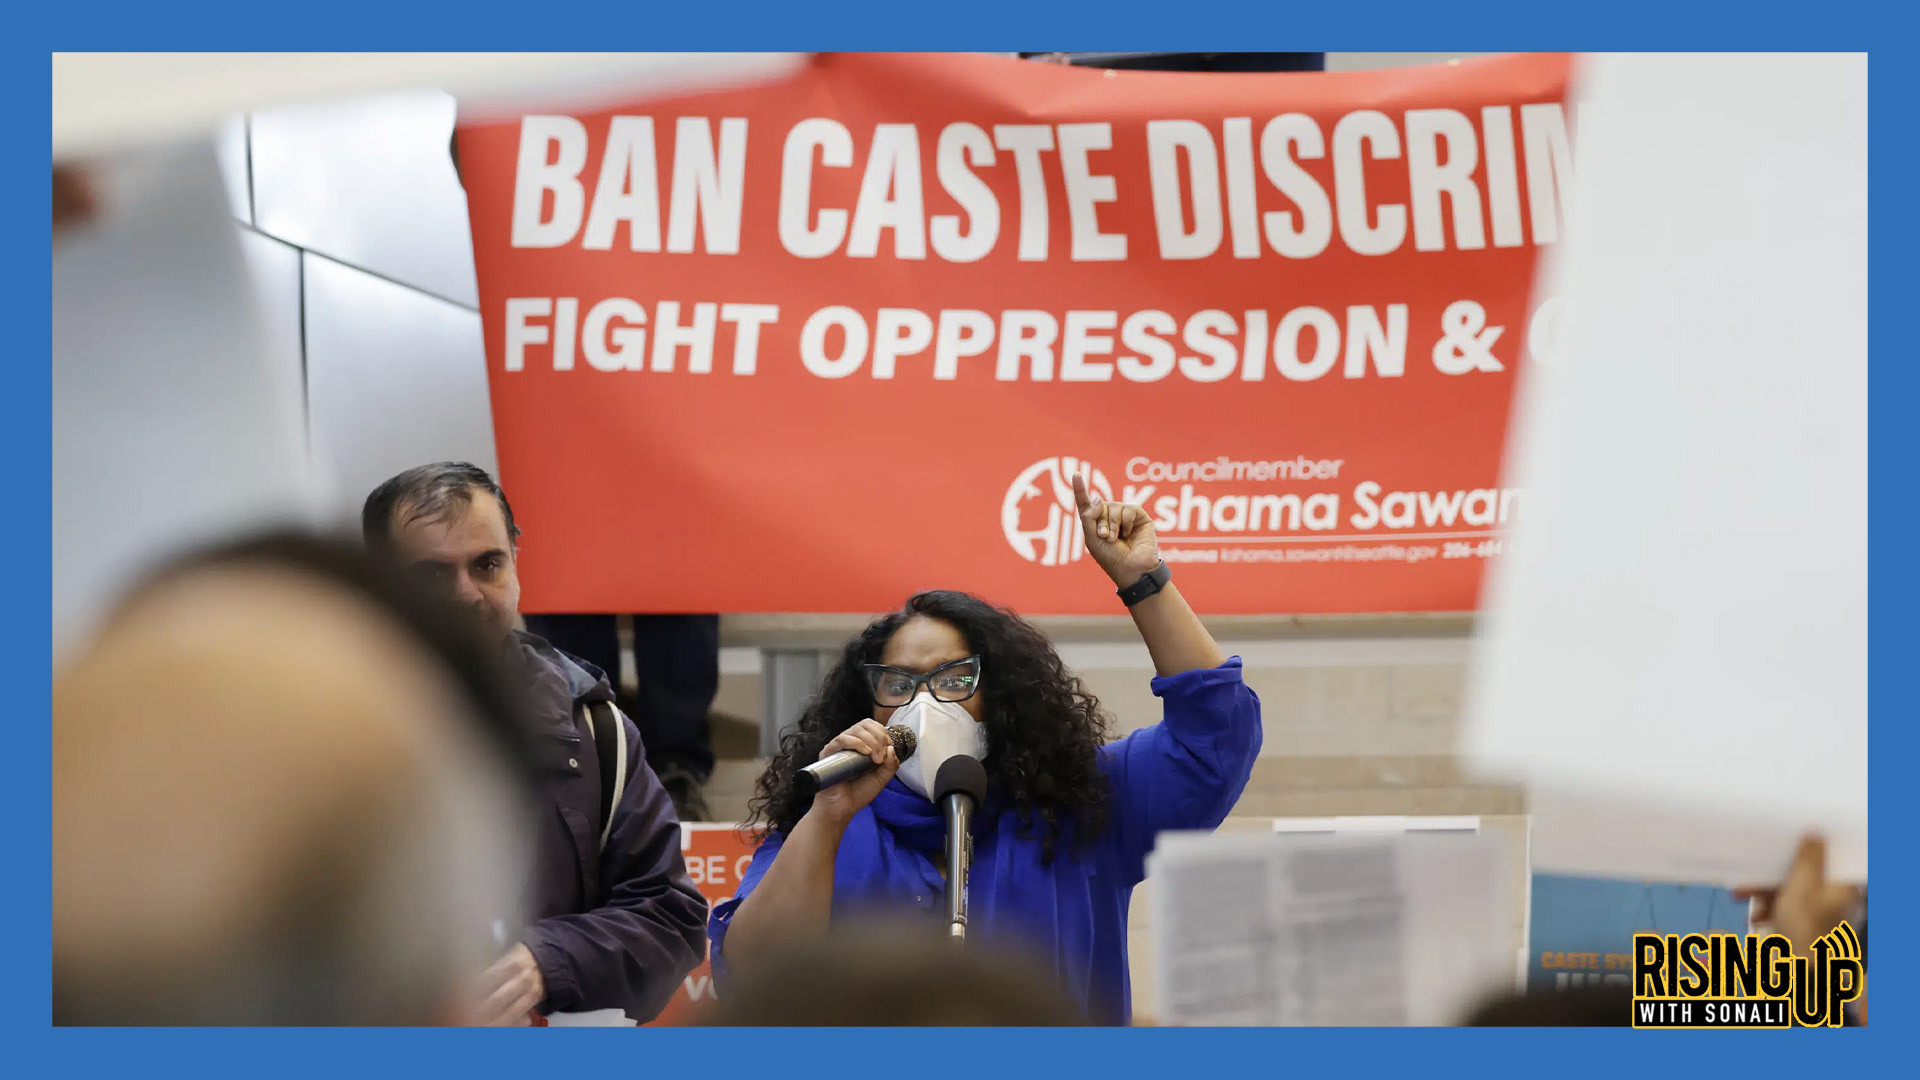 Seattle Becomes First City to Ban Caste Discrimination